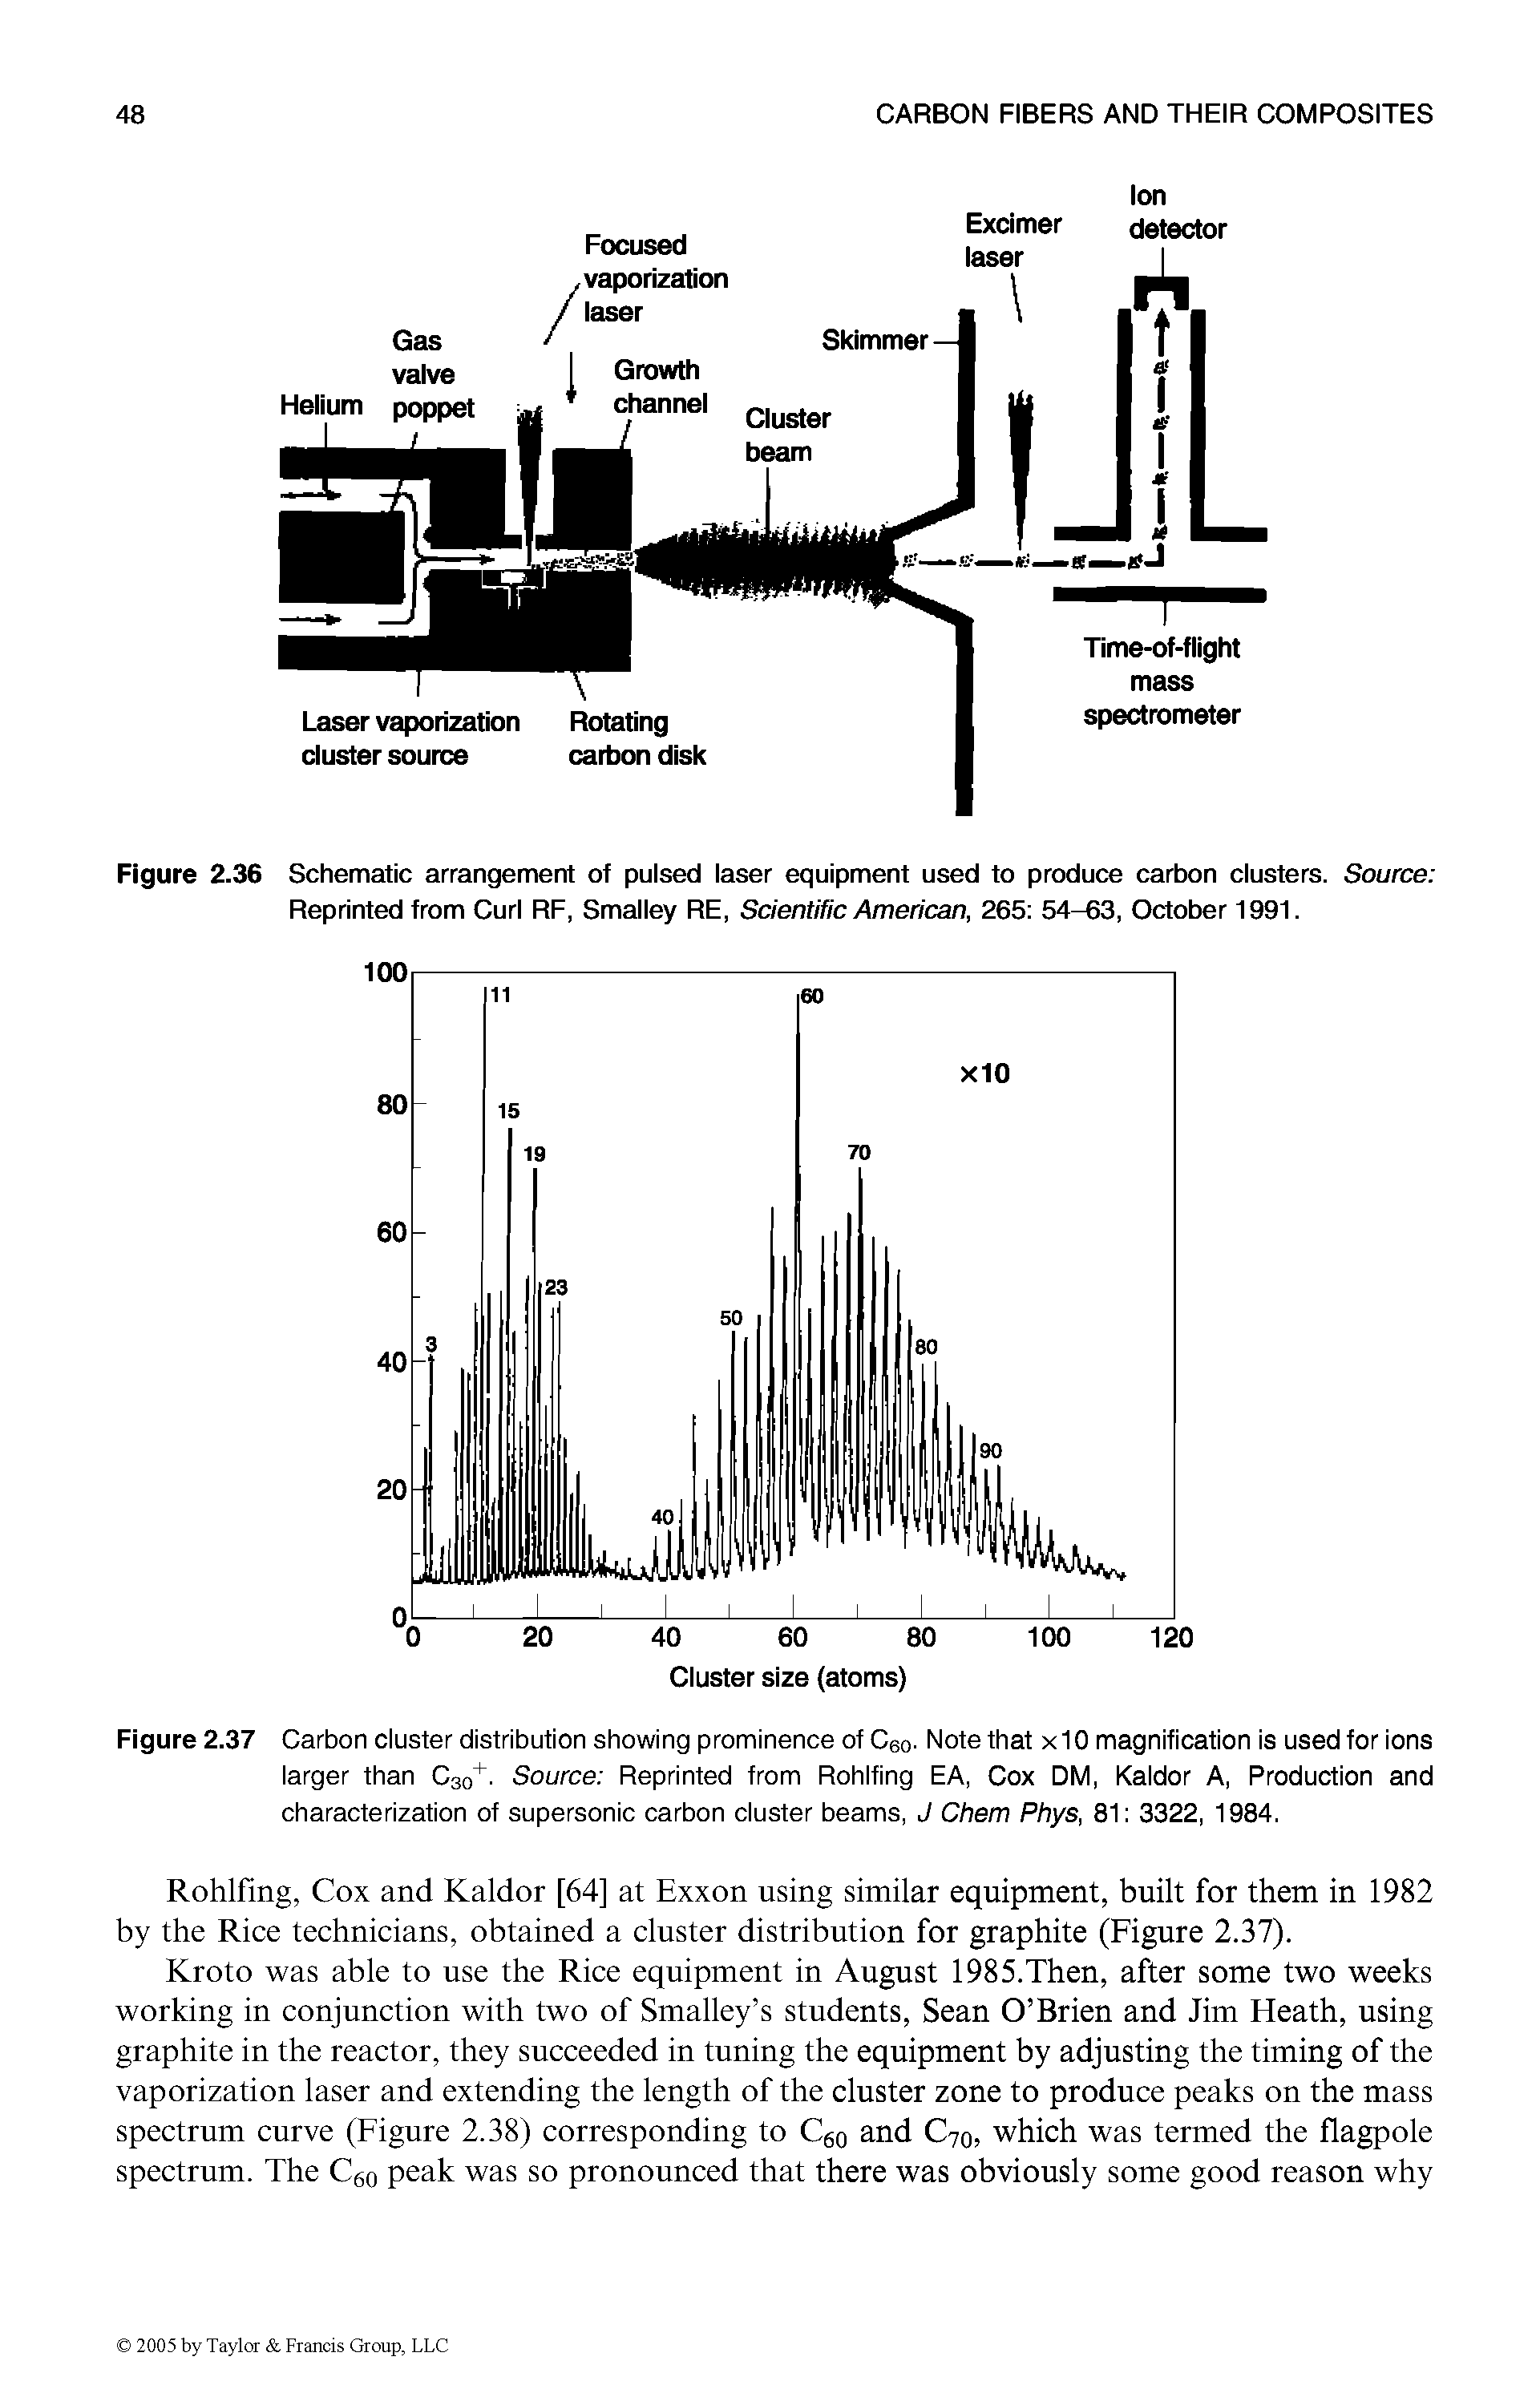 Figure 2.36 Schematic arrangement of pulsed laser equipment used to produce carbon clusters. Source Reprinted from Curl RF, Smalley RE, Scientific American, 265 54-63, October 1991.